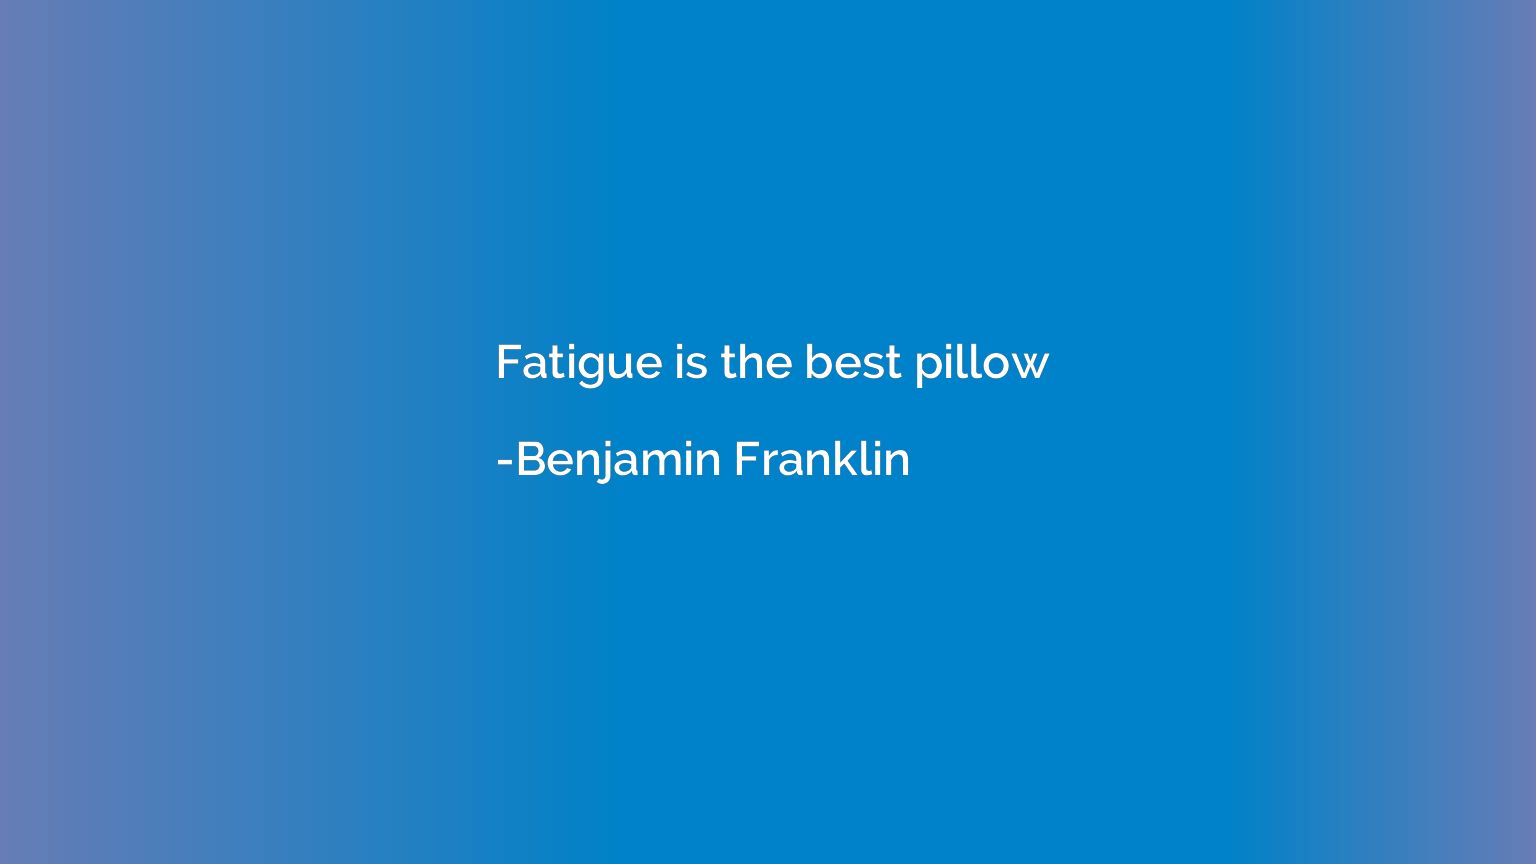 Fatigue is the best pillow